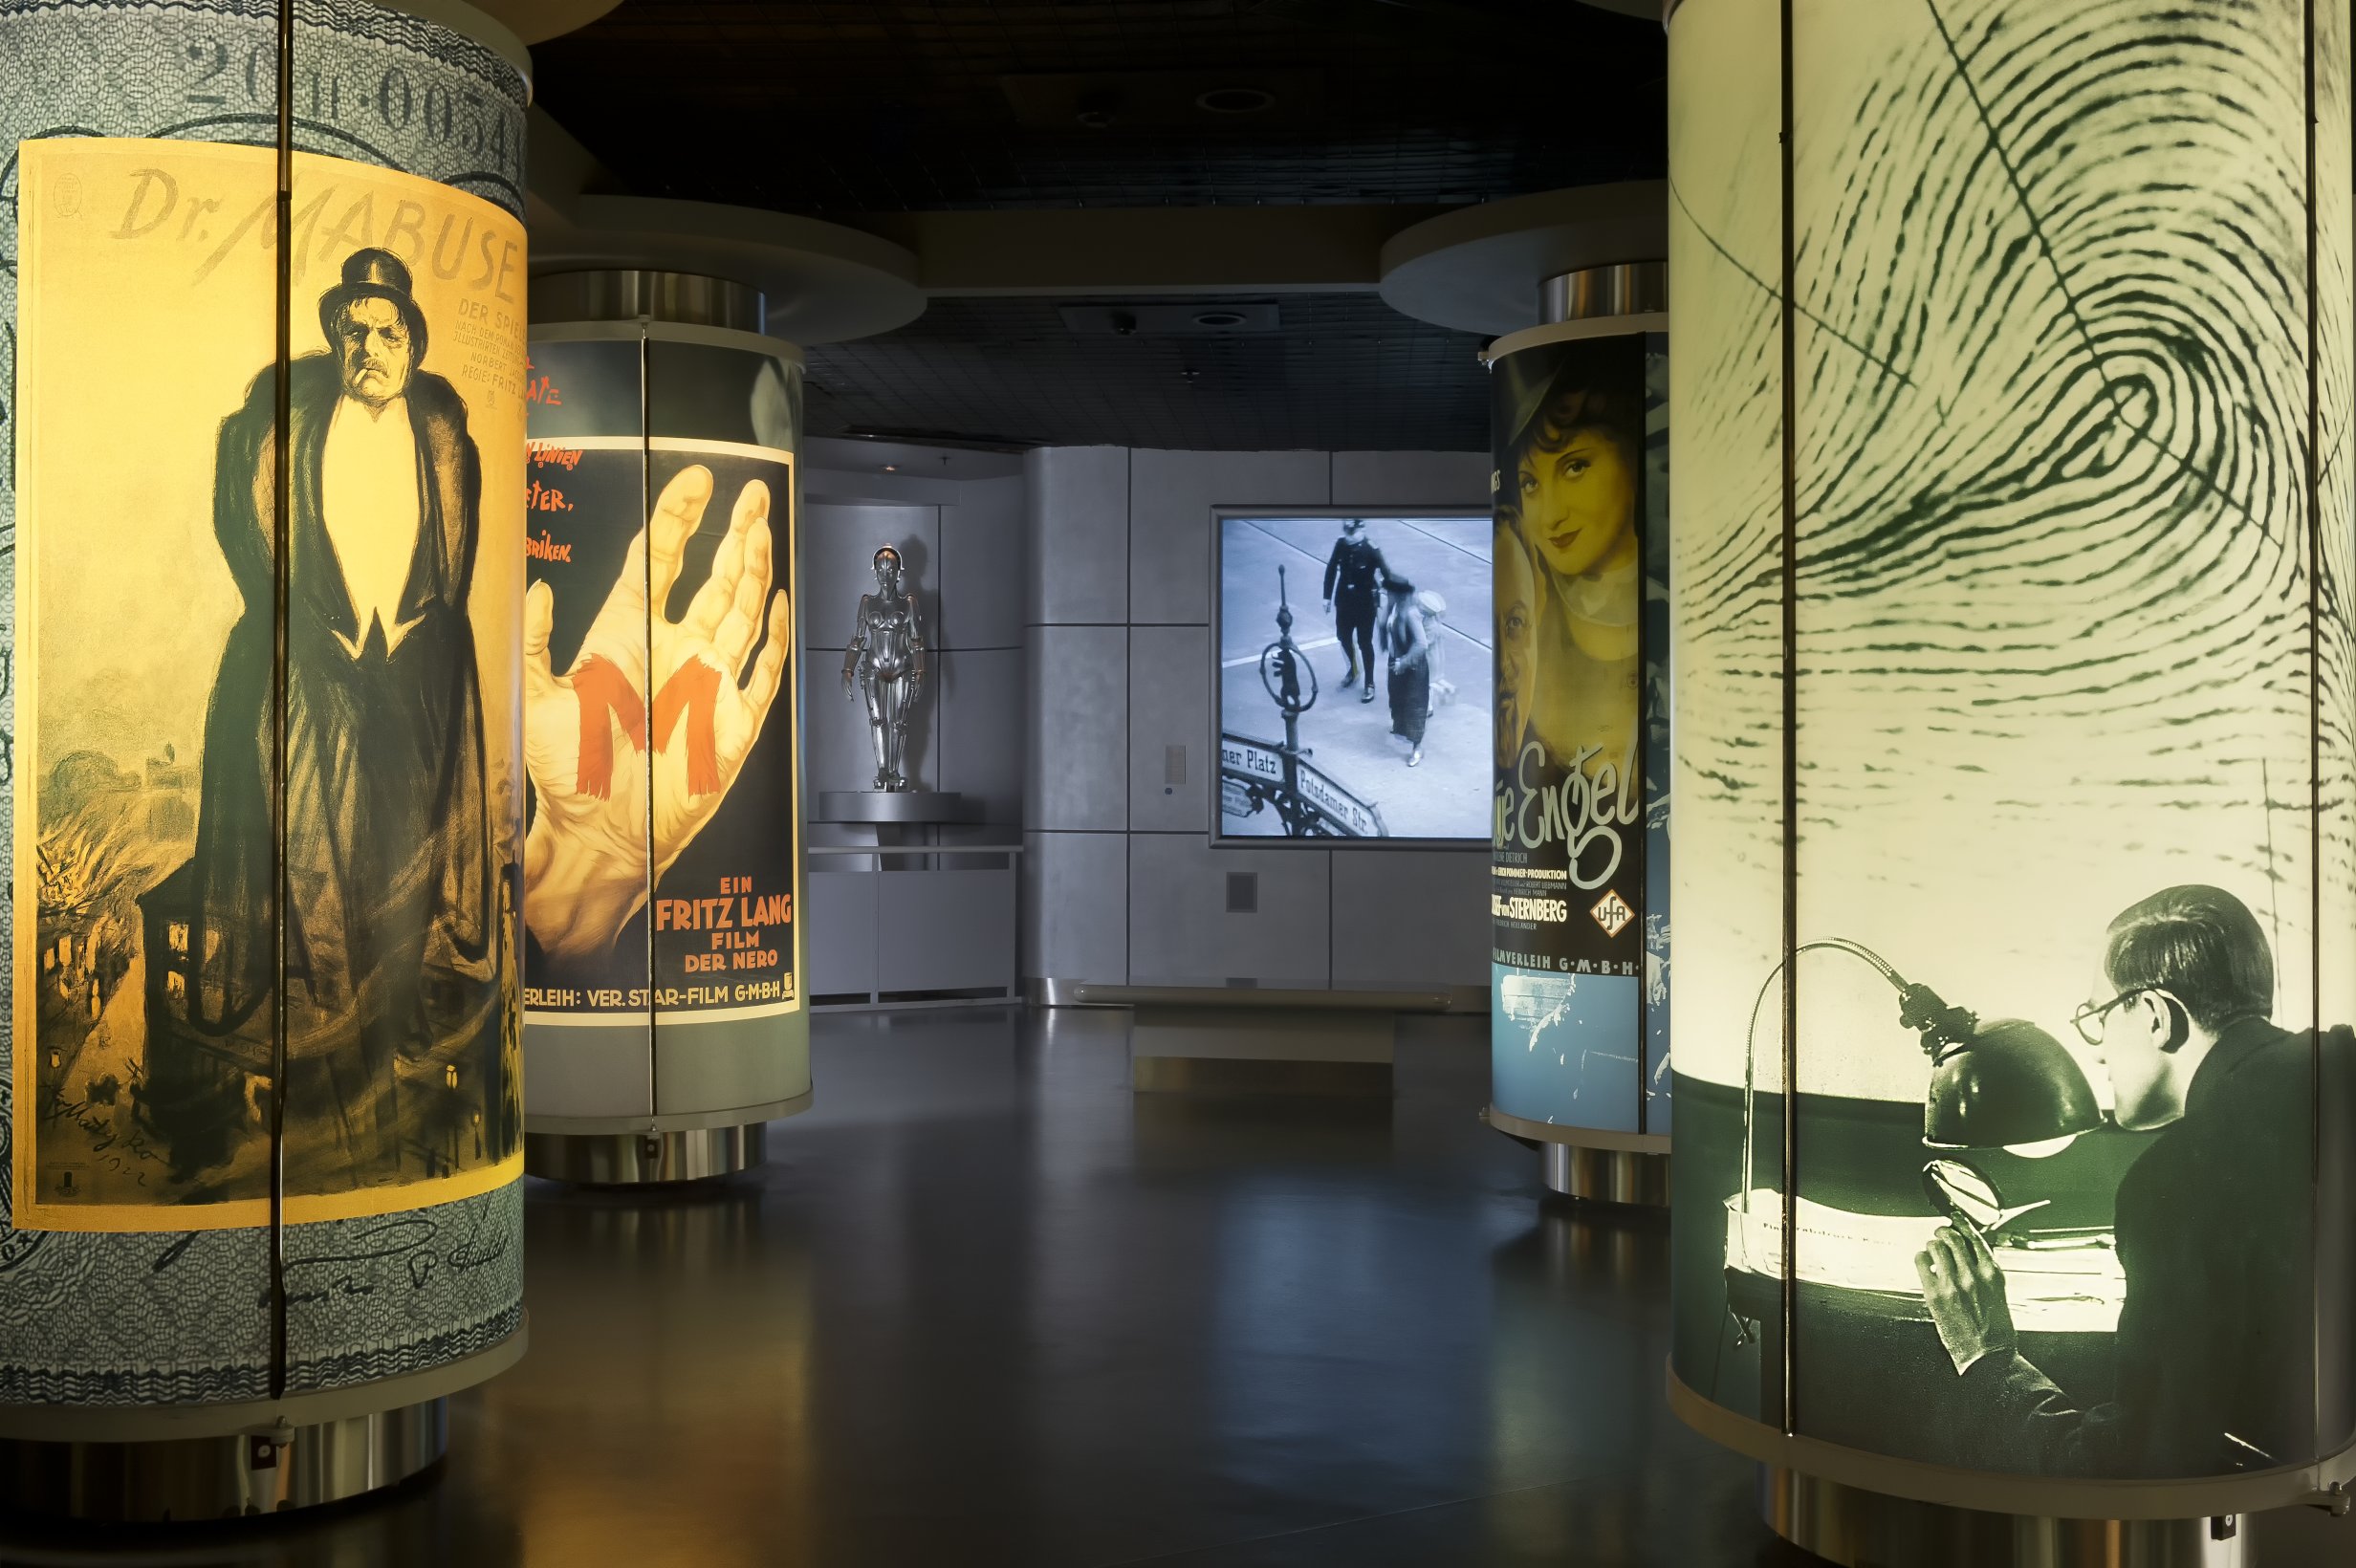 Part of the exhibition about film during the Weimar Republic